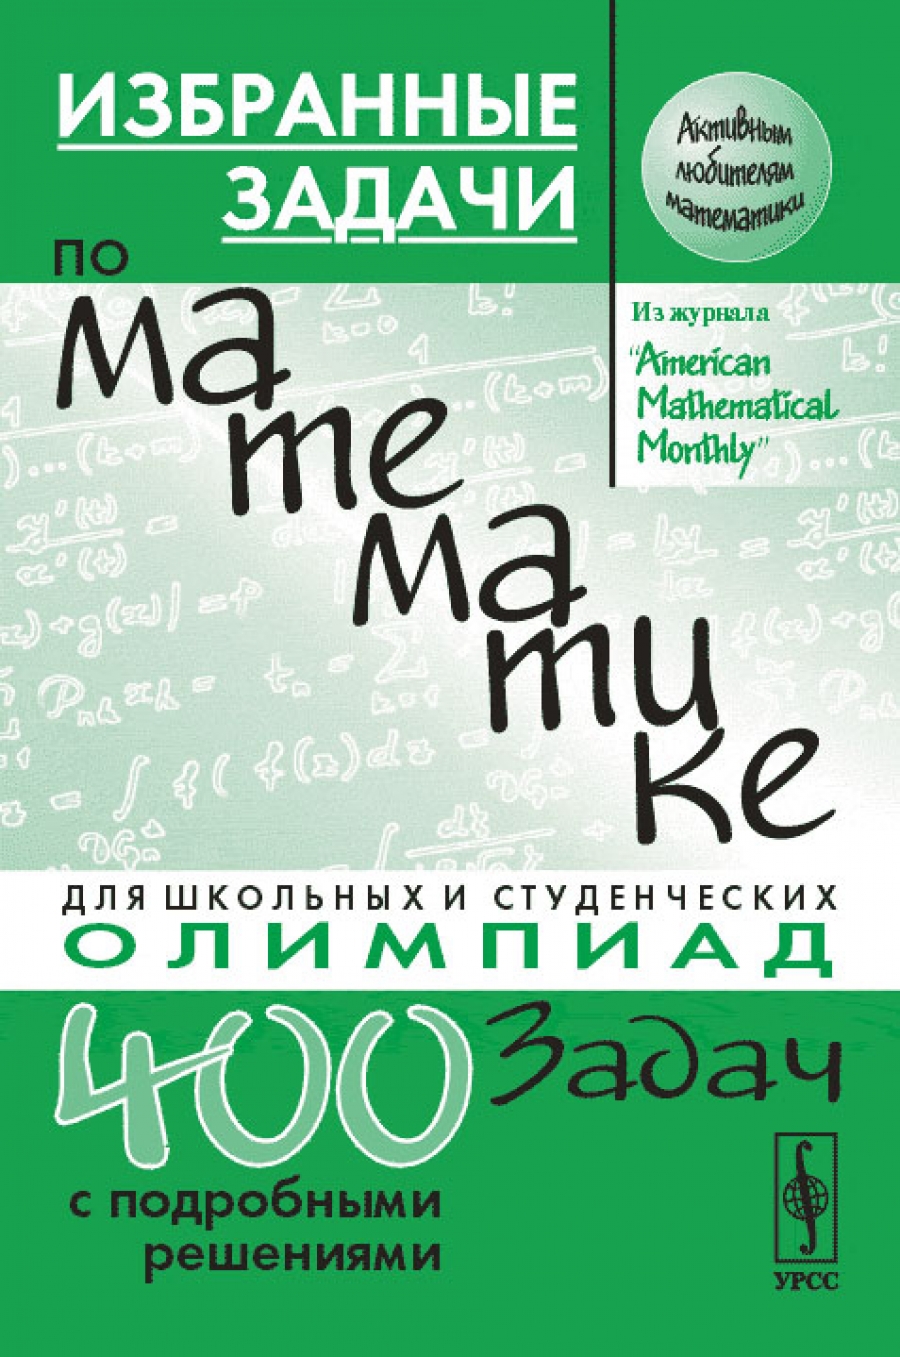       American Mathematical Monthly. 2- .,  